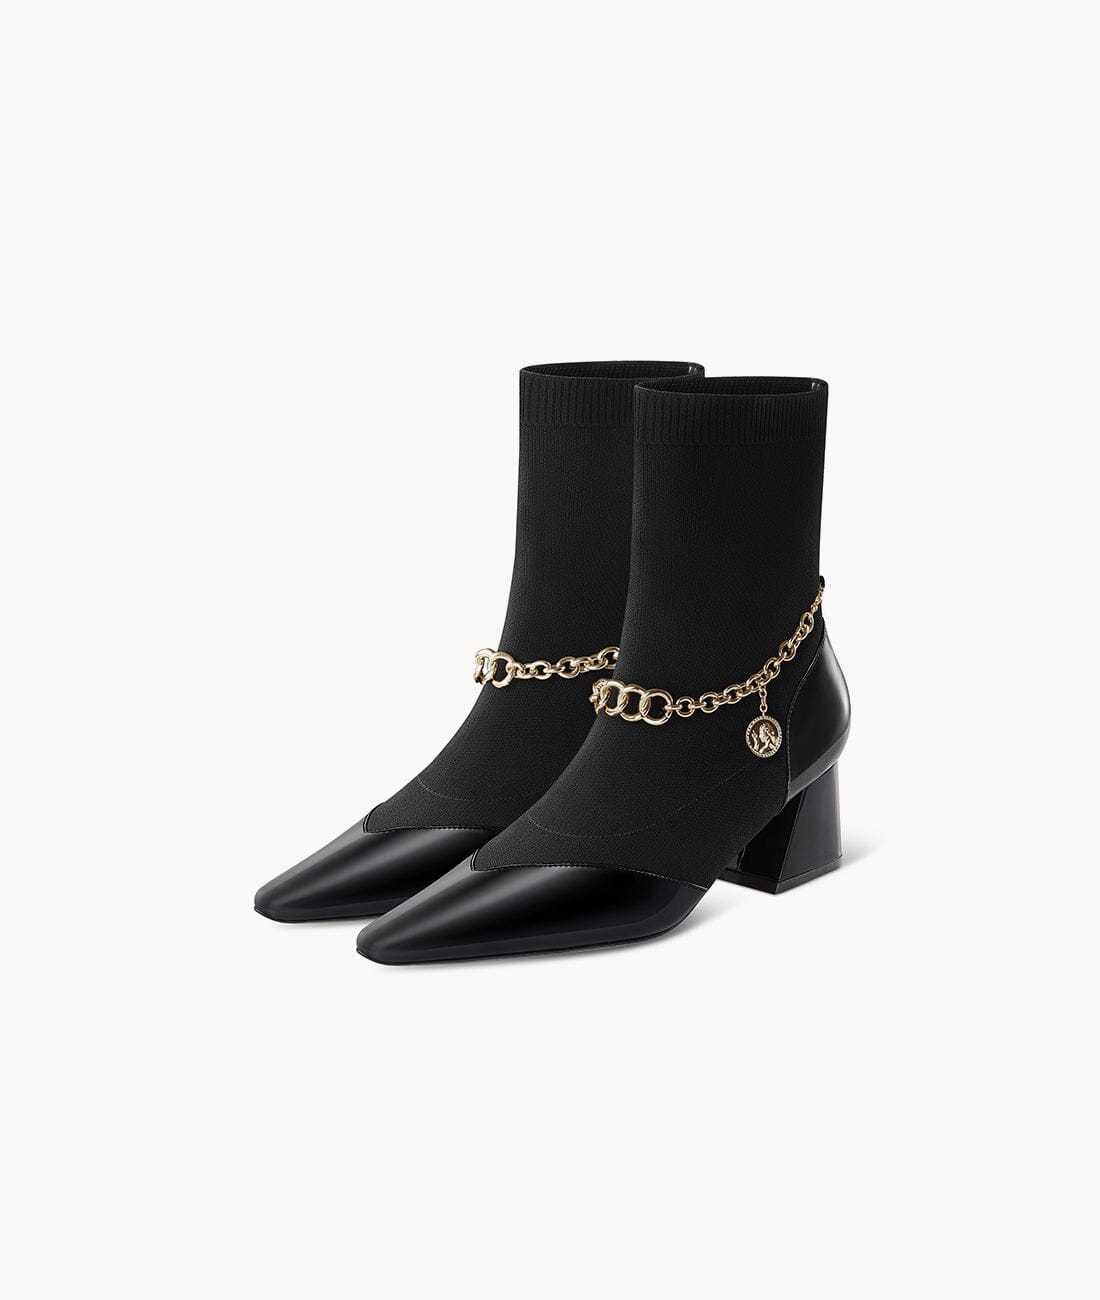 7or9 - Gold Coin Ankle Chain - Ankle Chain